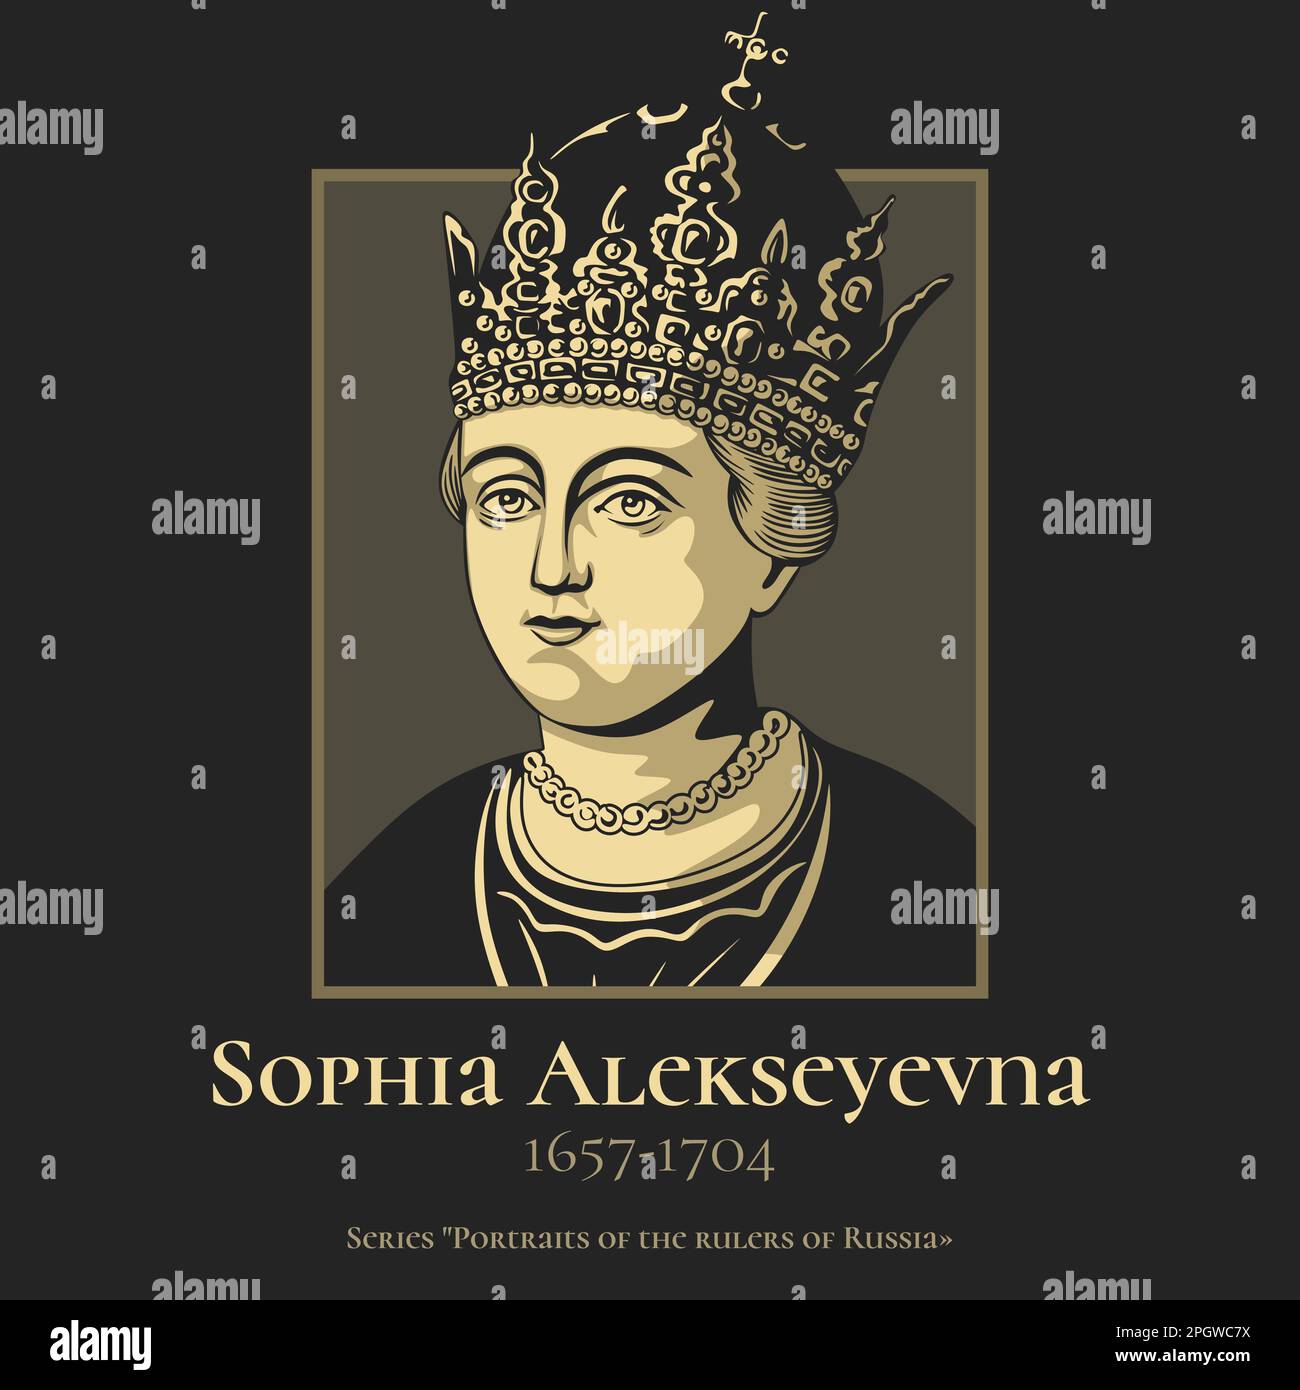 Sophia Alekseyevna (1657-1704) was a Russian princess who ruled as regent of Russia from 1682 to 1689. Stock Vector